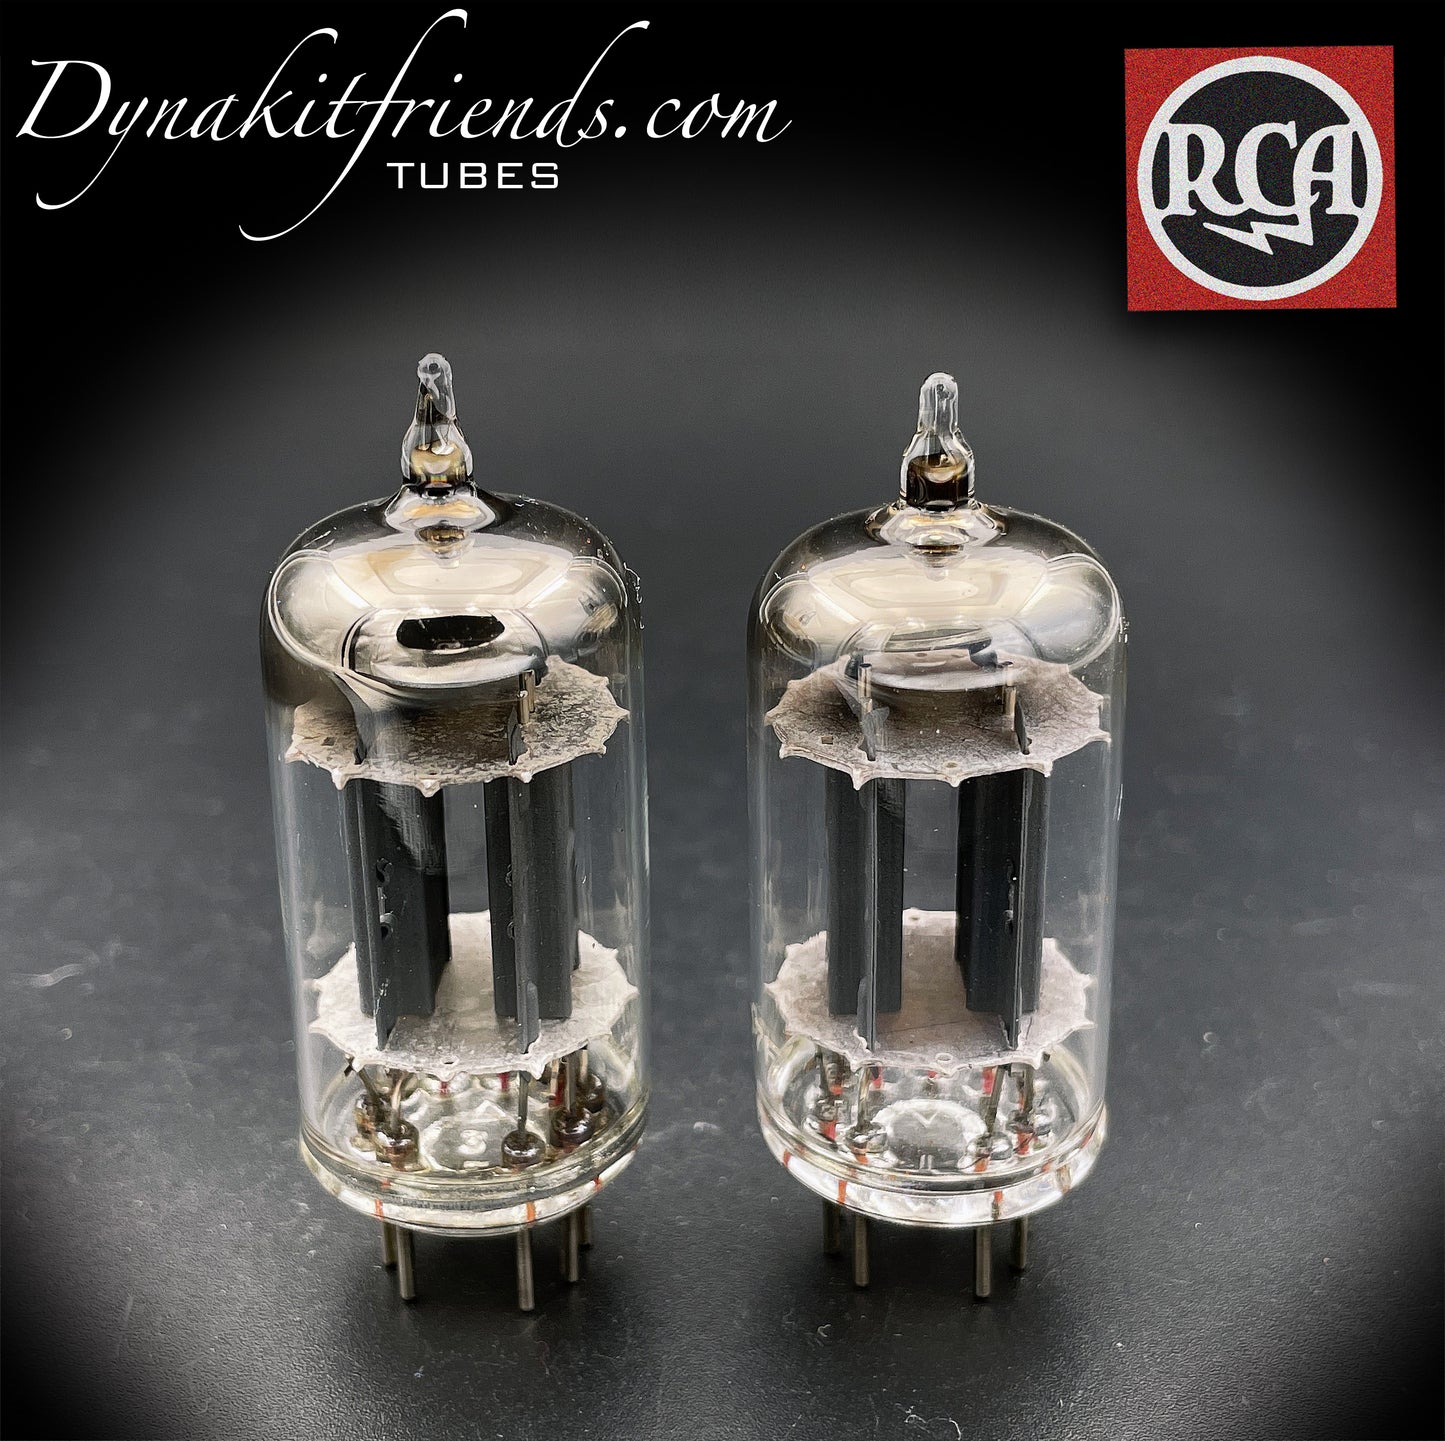 5963 ( ECC82 12AU7 WA ) RCA NOS Matched Tubes Low Noise & Microphonics Matched Tubes Made in USA